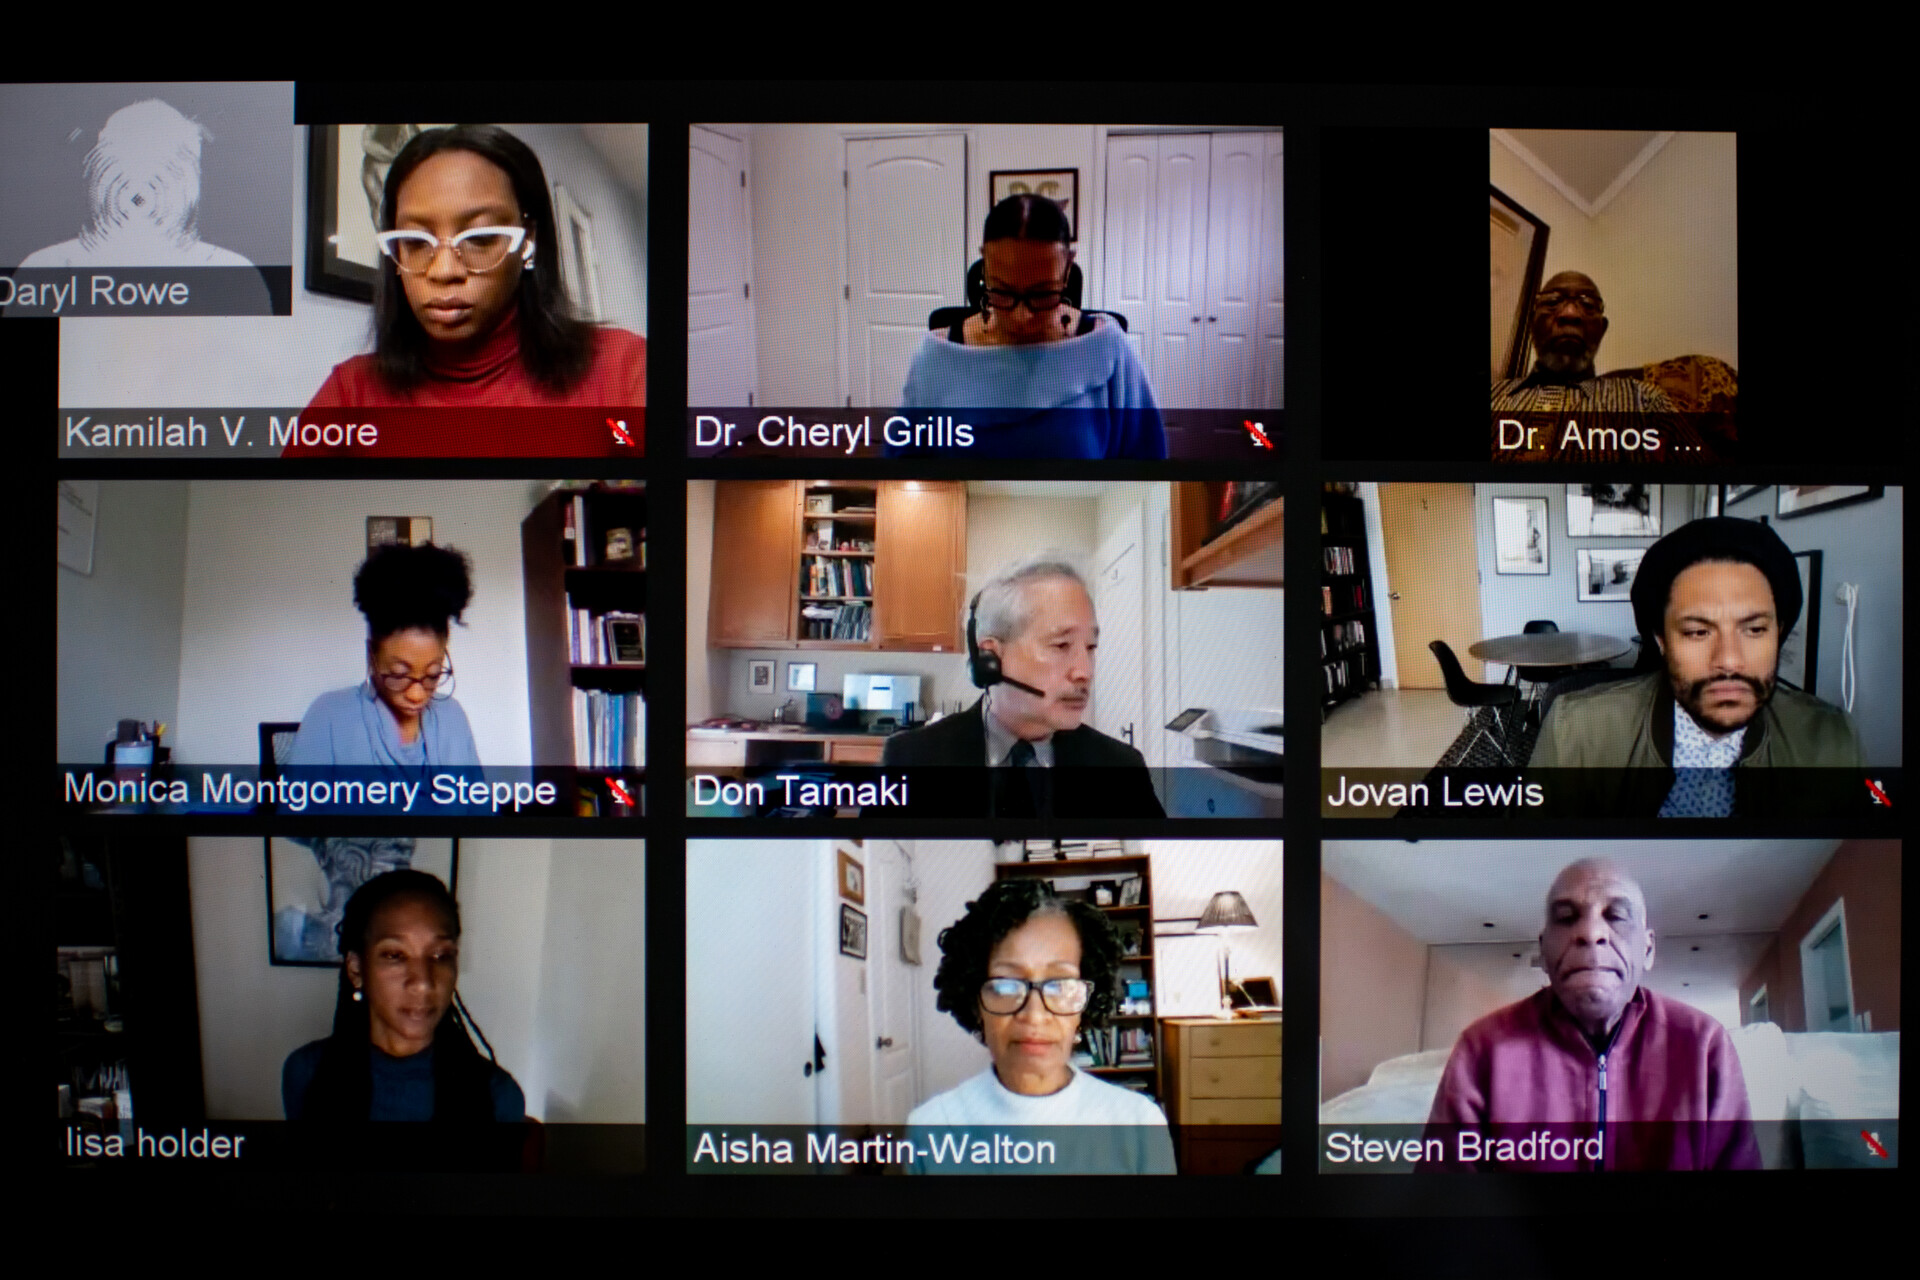 screenshot of zoom meeting with participants faces